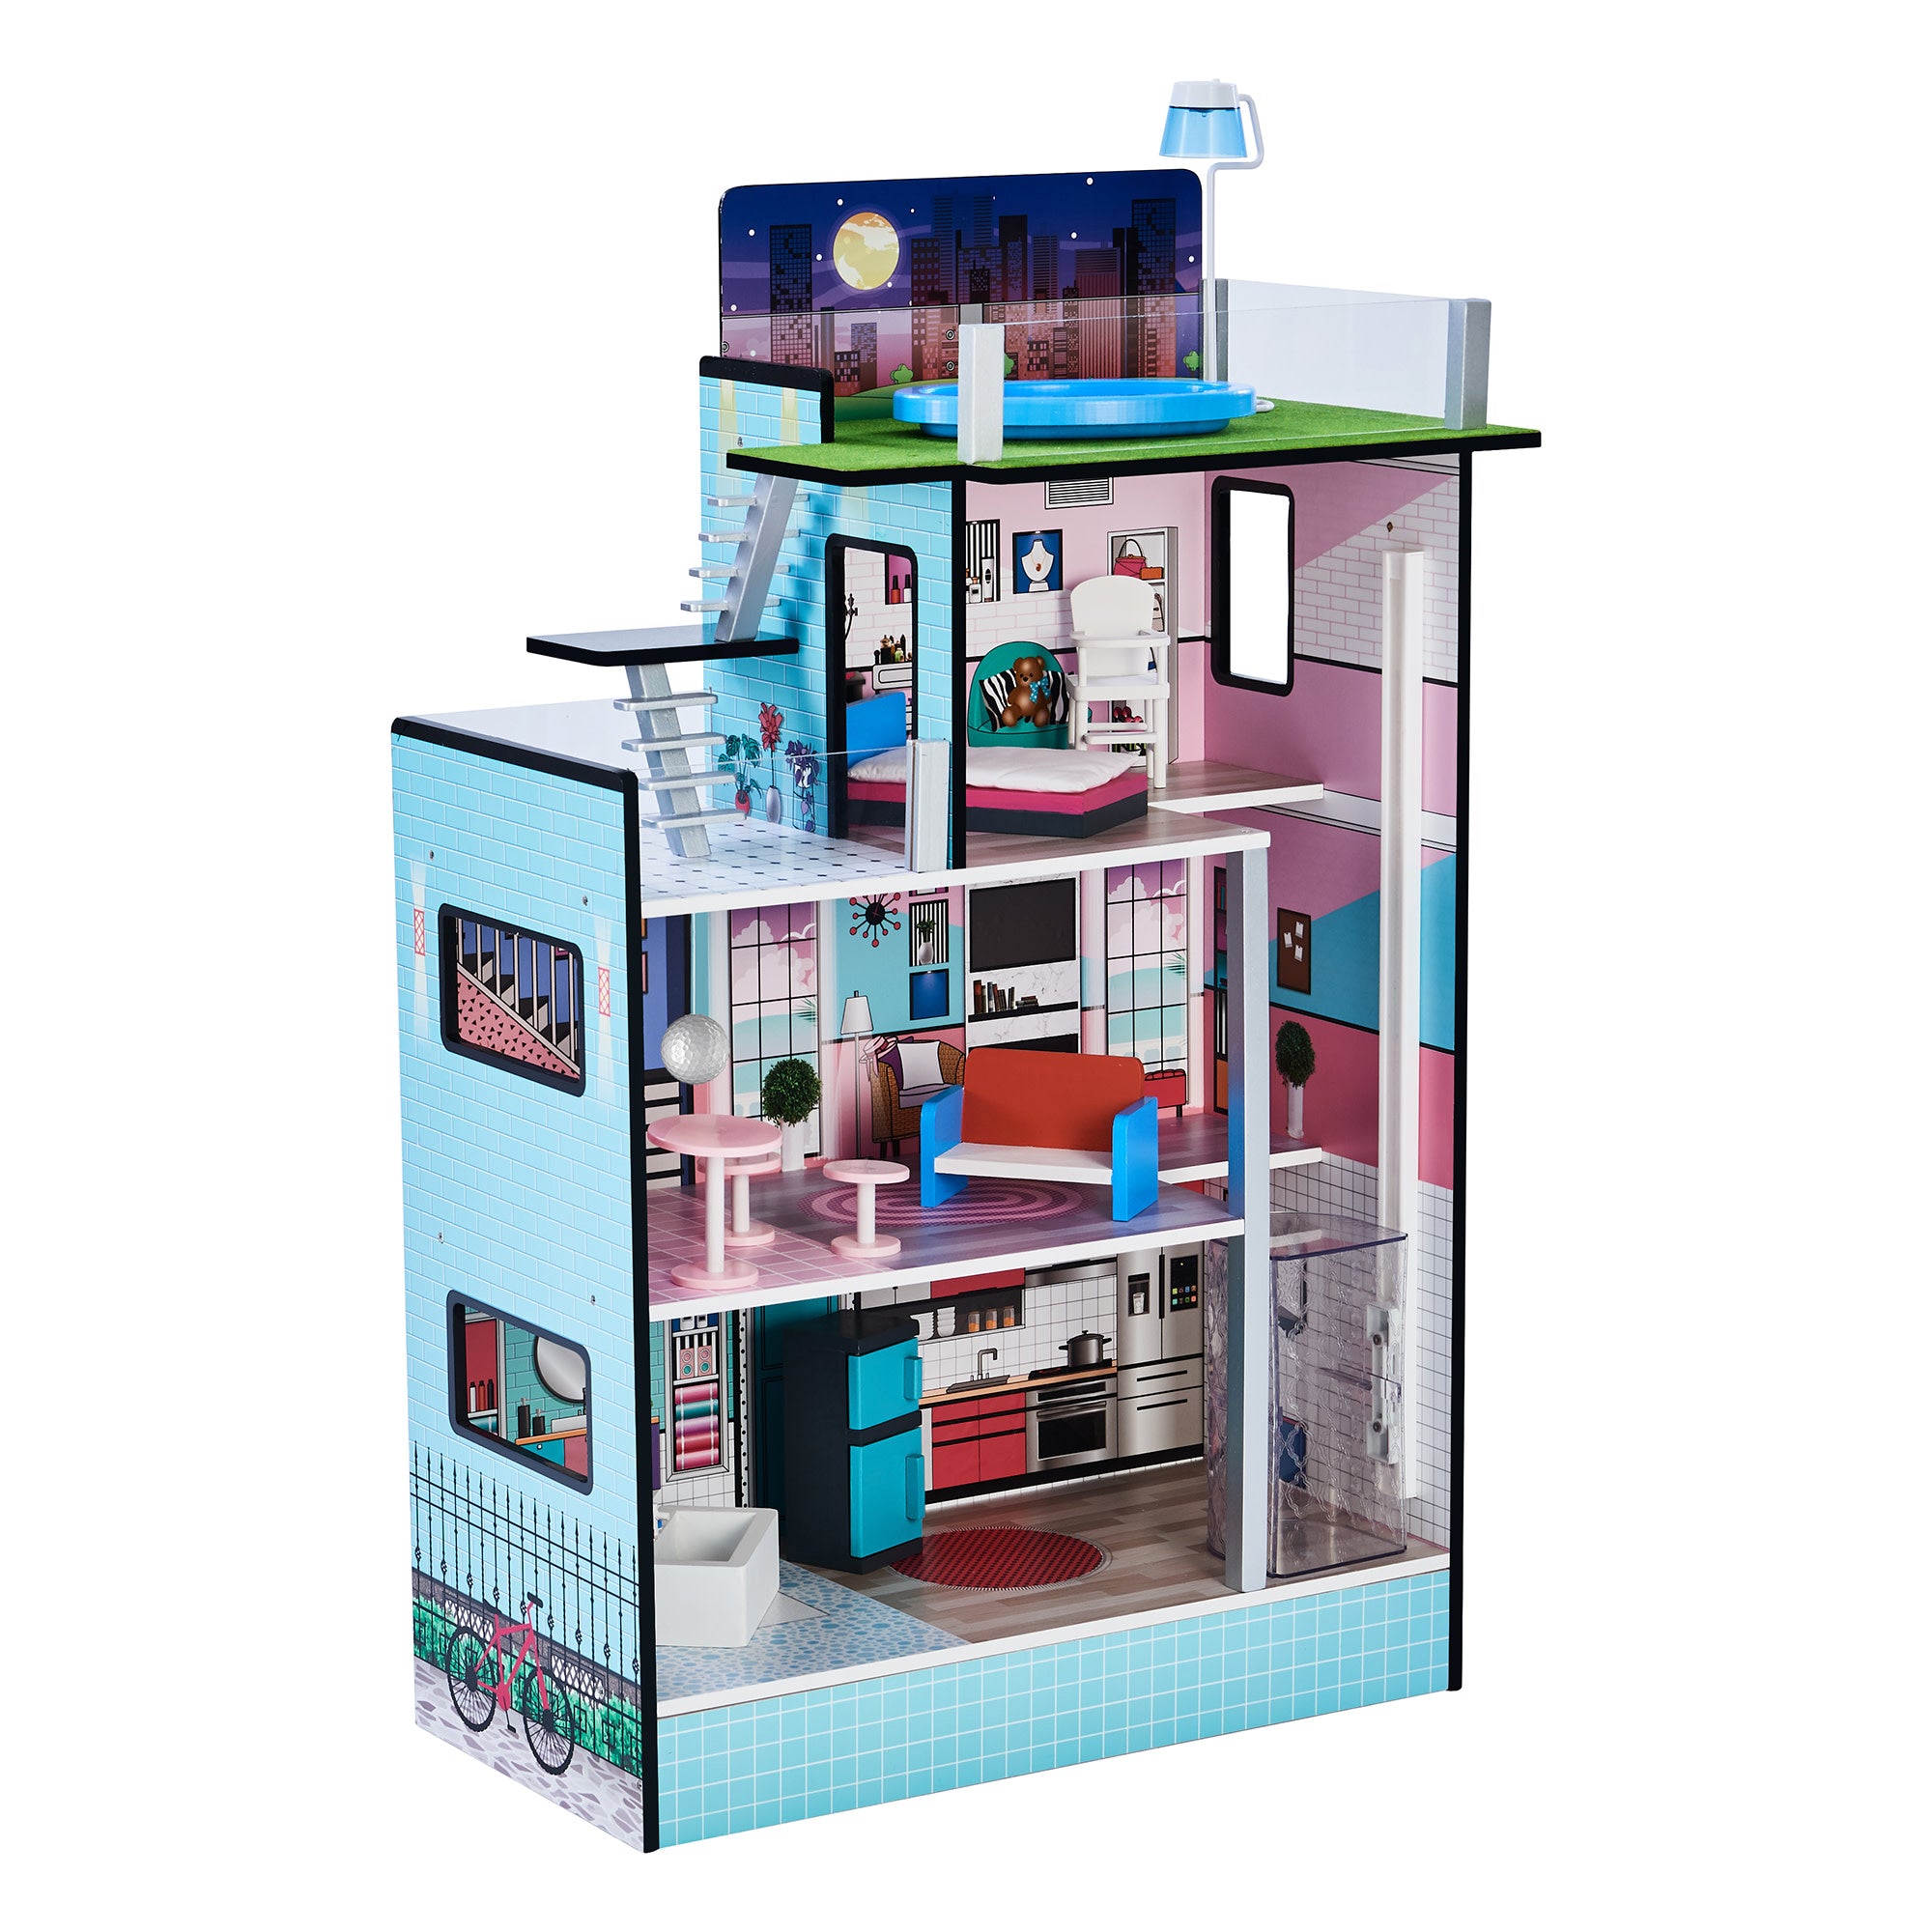 Teamson Kids Dreamland Barcelona Dollhouse with 10 Accessories, Turquoise/Black